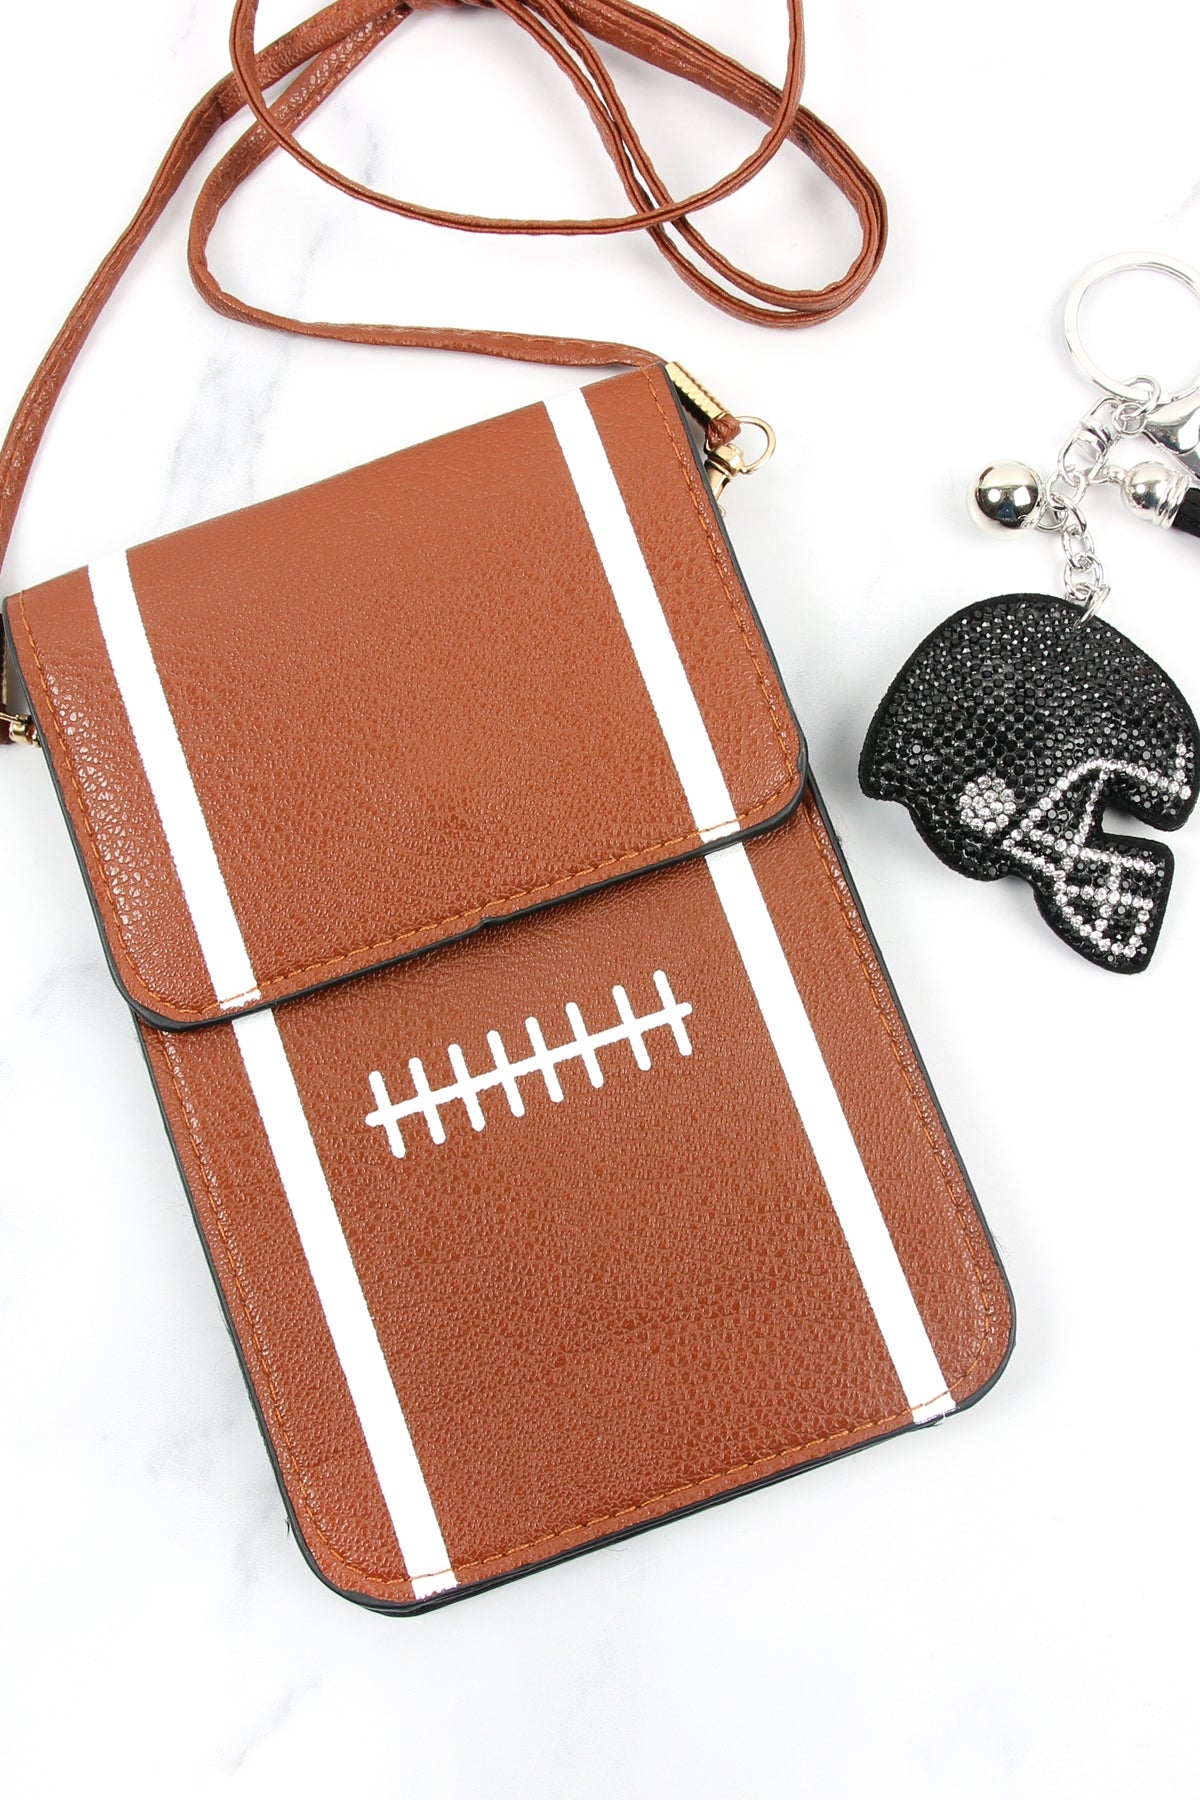 FOOTBALL CELLPHONE CROSSBODY BAG WITH CLEAR WINDOW POUCH/6PCS